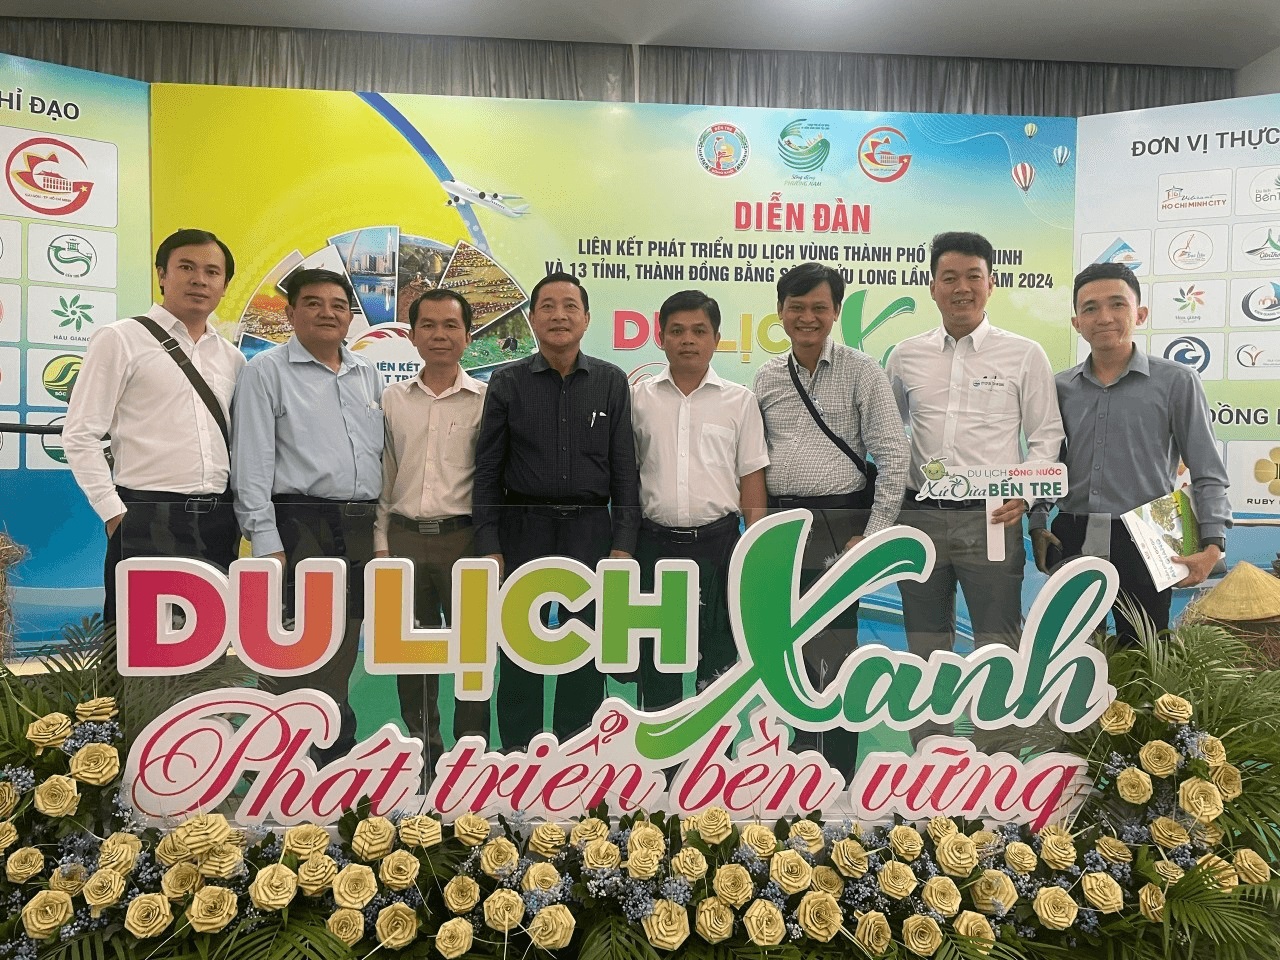 Forum linking tourism in Ho Chi Minh City and 13 provinces and cities in the Mekong Delta